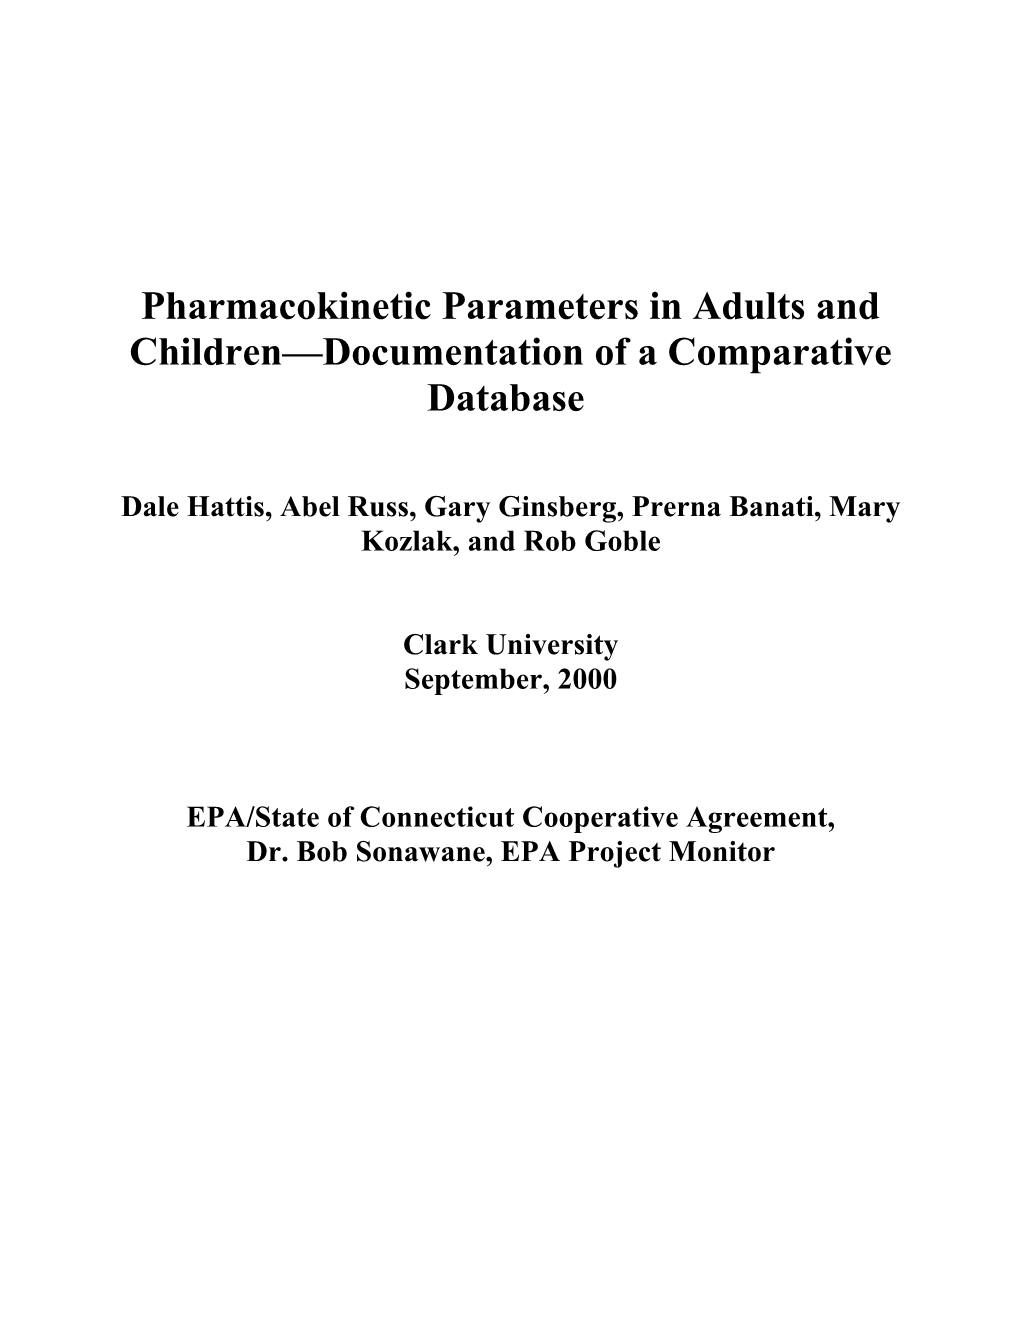 Pharmacokinetic Parameters in Adults and Children Documentation of a Comparative Database